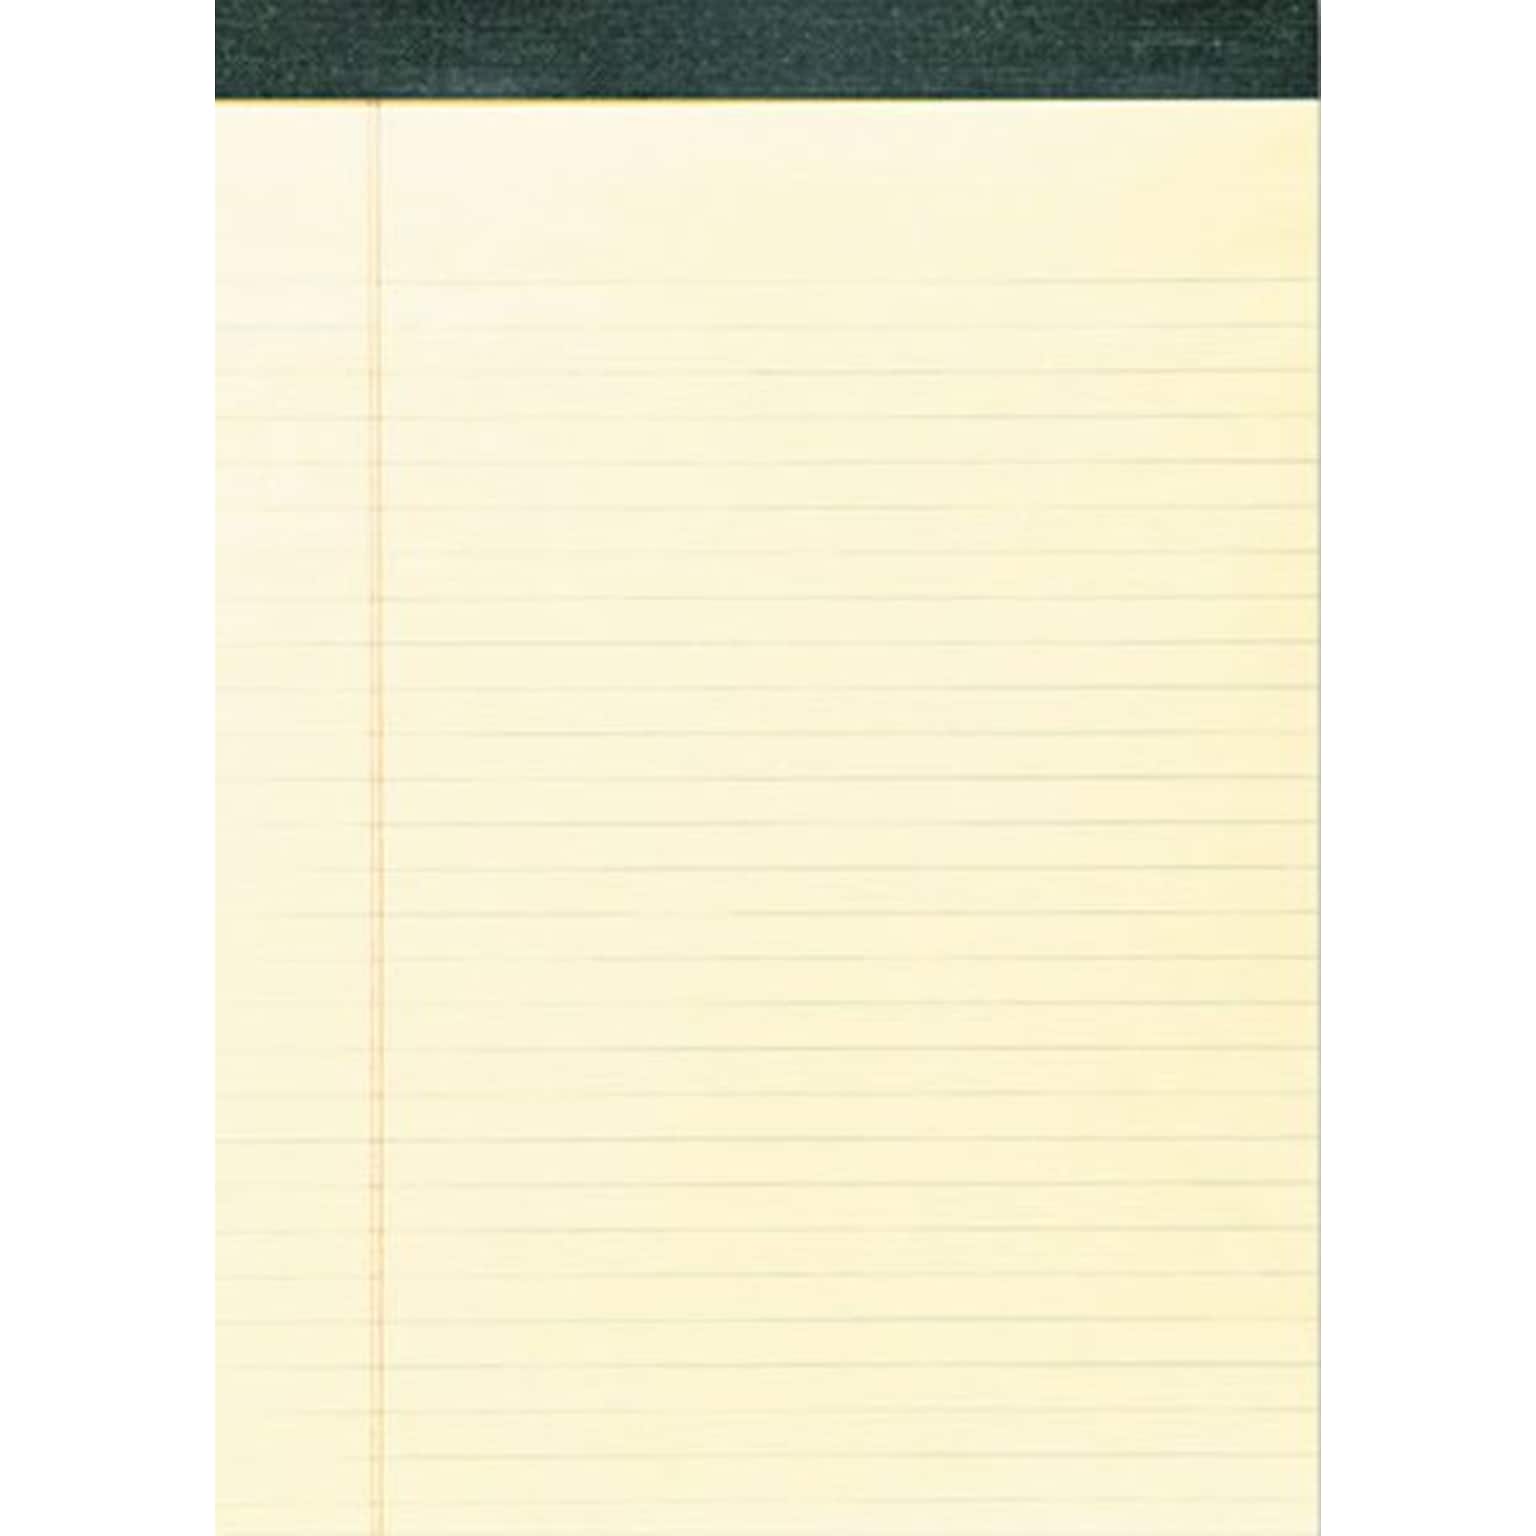 Roaring Spring Paper Products Recycled Legal Pad, 8 1/2 x 11 3/4, 40 Sheets/Pad, Canary